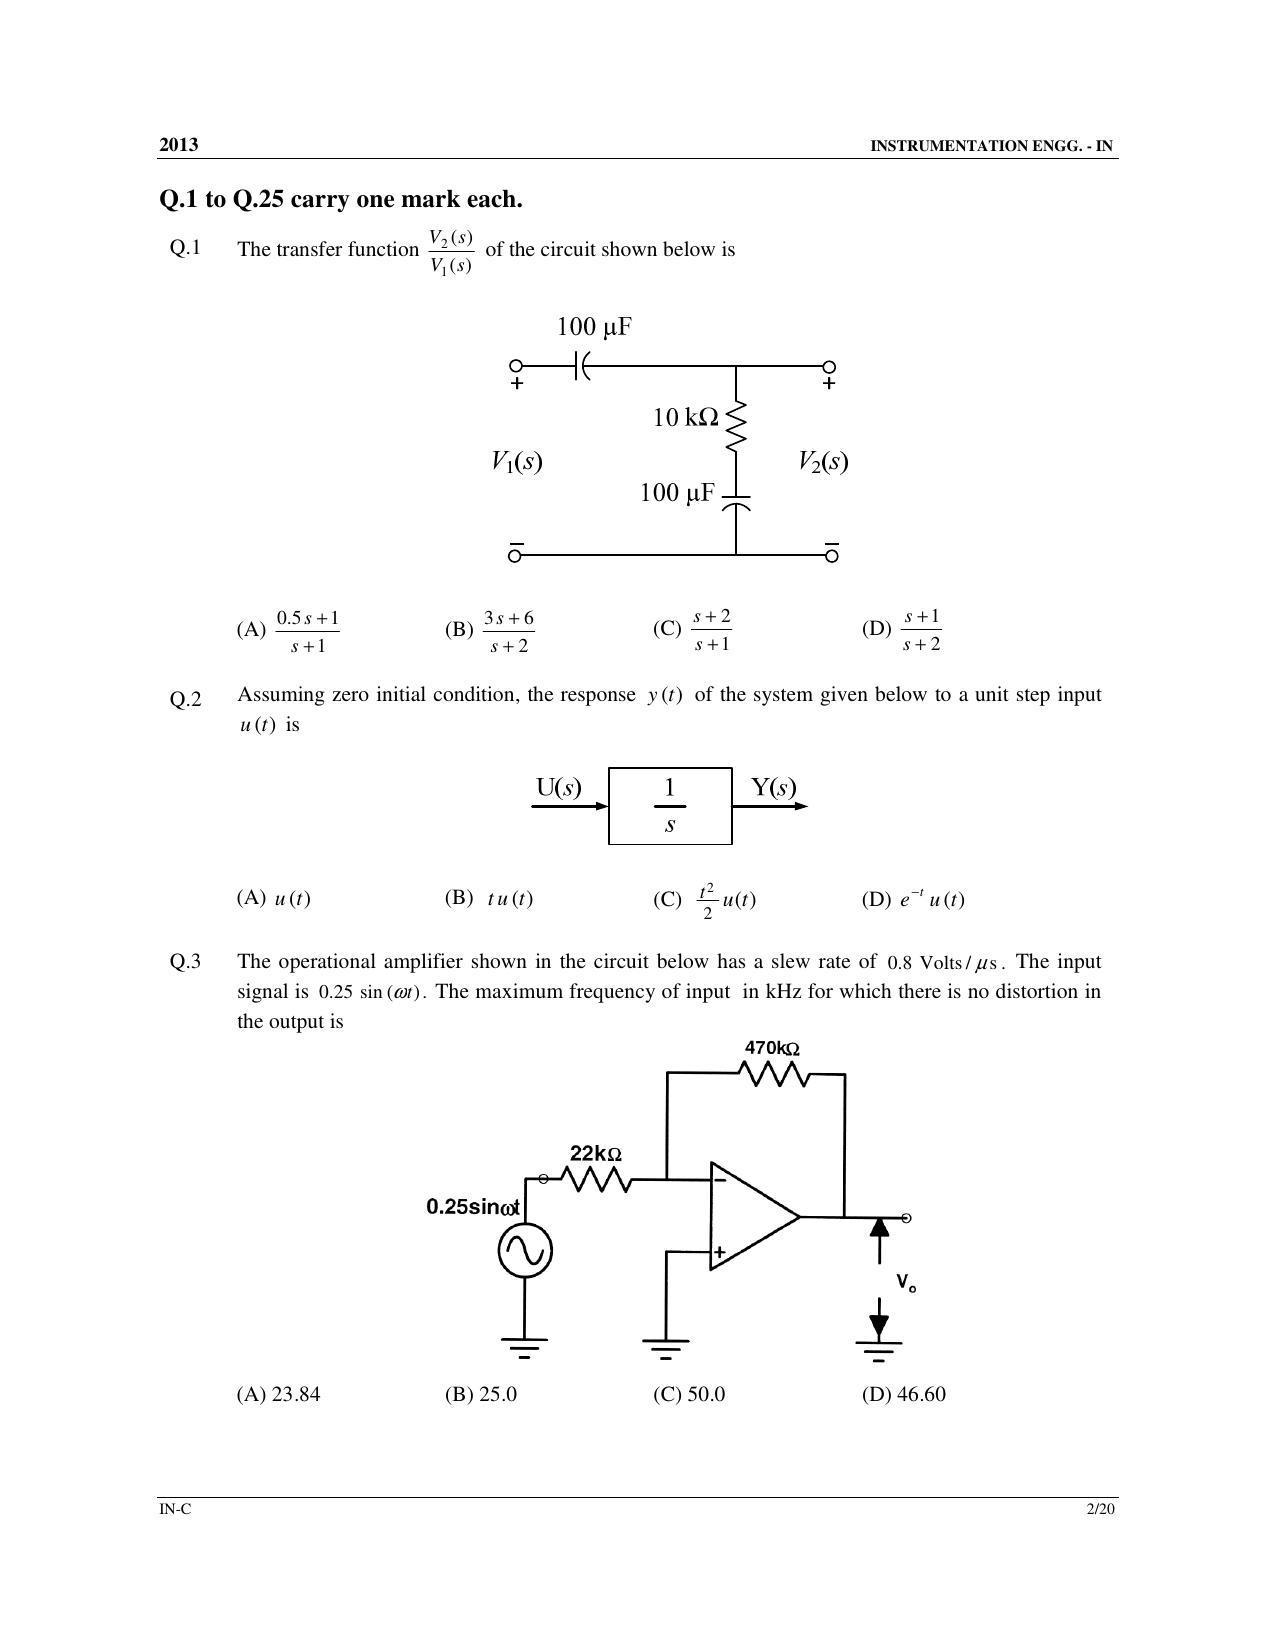 GATE 2013 Instrumentation Engineering (IN) Question Paper with Answer Key - Page 37